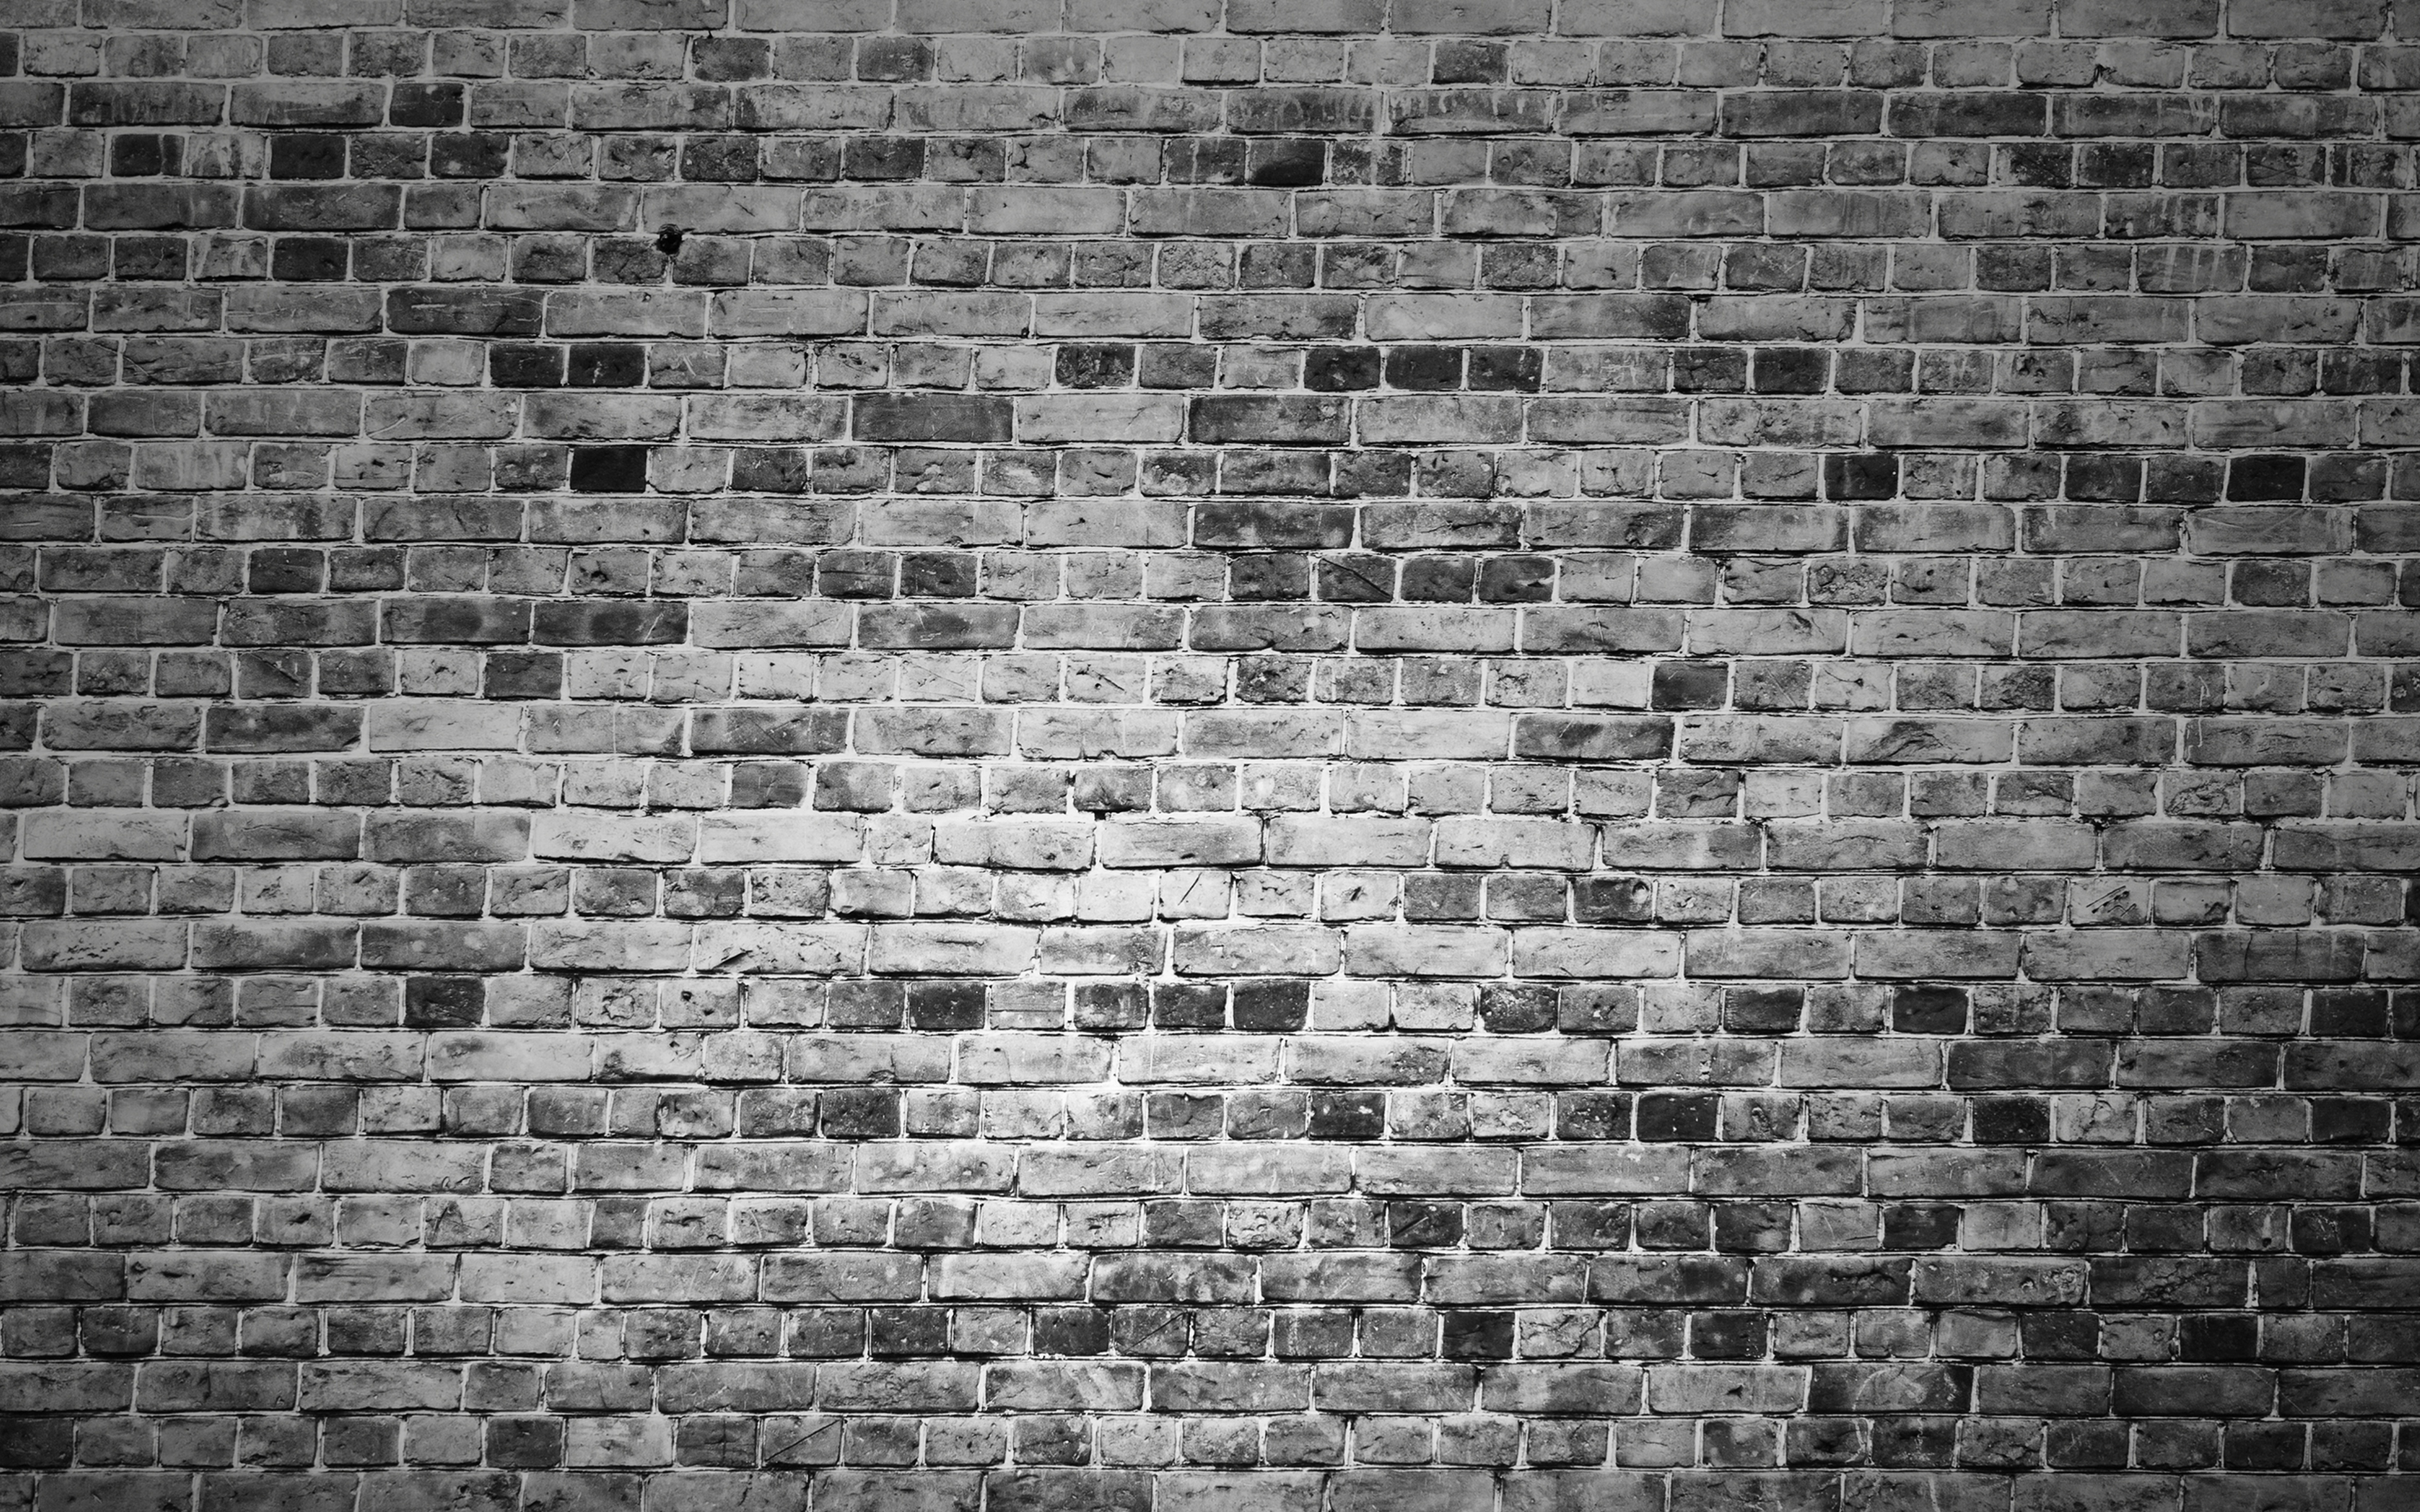 Download 3840x2400 wallpaper brick wall black and white 